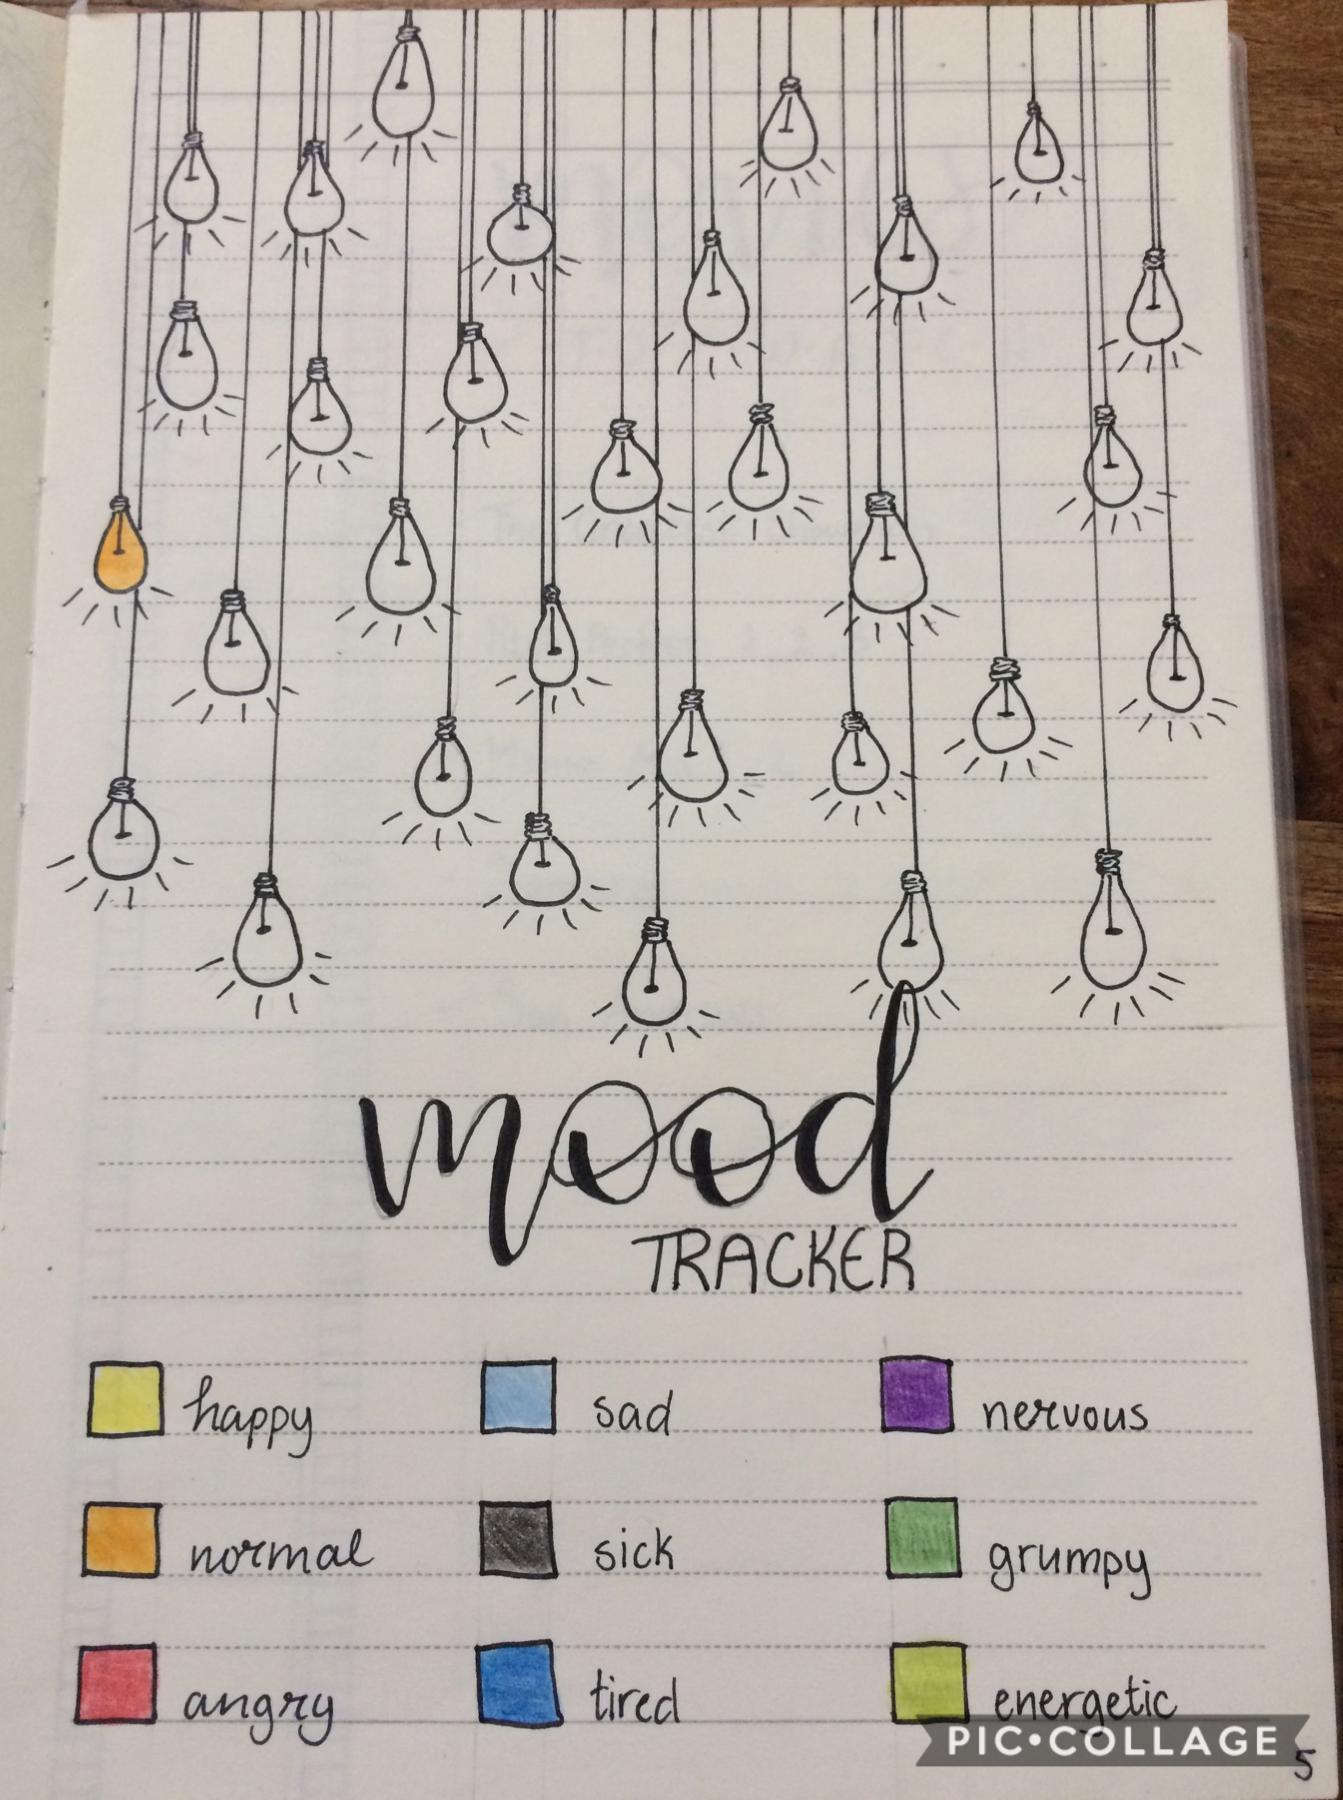 Here is a mood tracker I did at school!